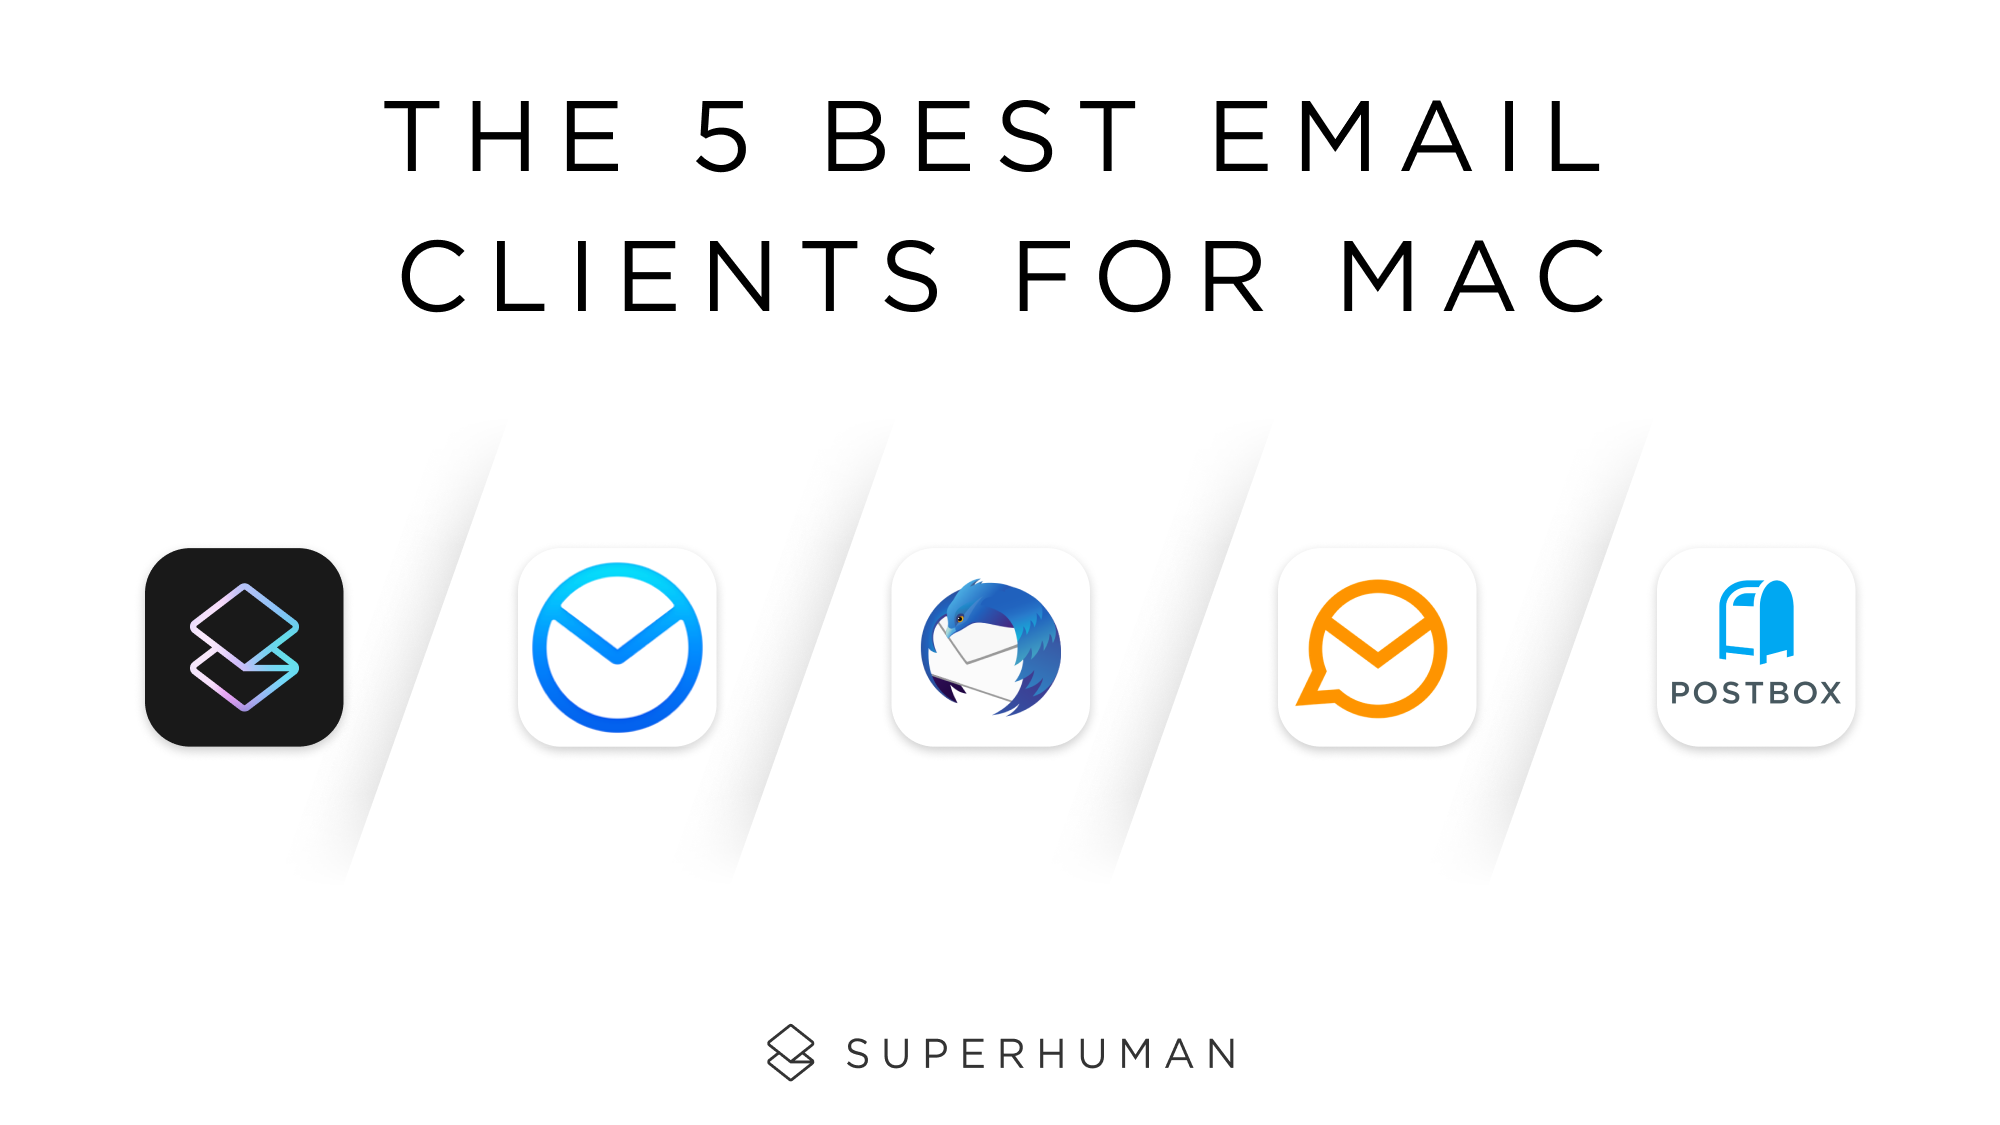 MailMate: A powerful email client for Mac users that offers advanced features and customization options.
Thunderbird: A popular open-source email client that provides a range of features and add-ons for enhanced email management.